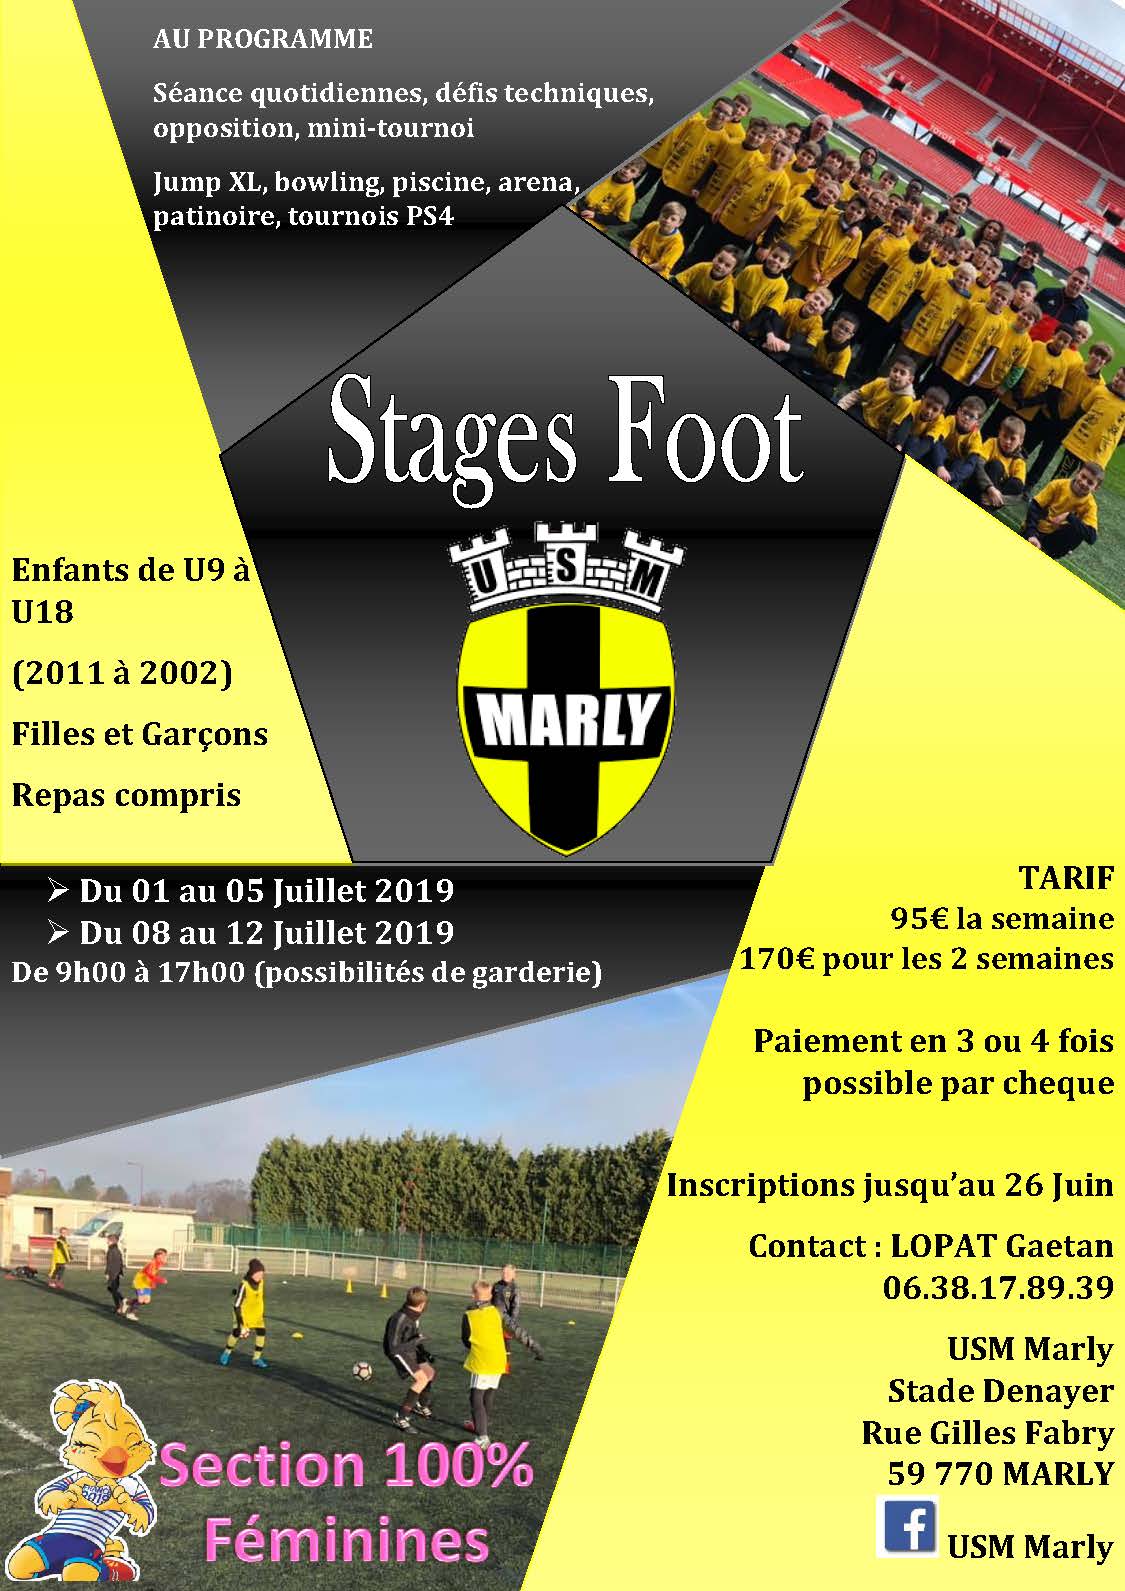 Stages Foot USM Marly